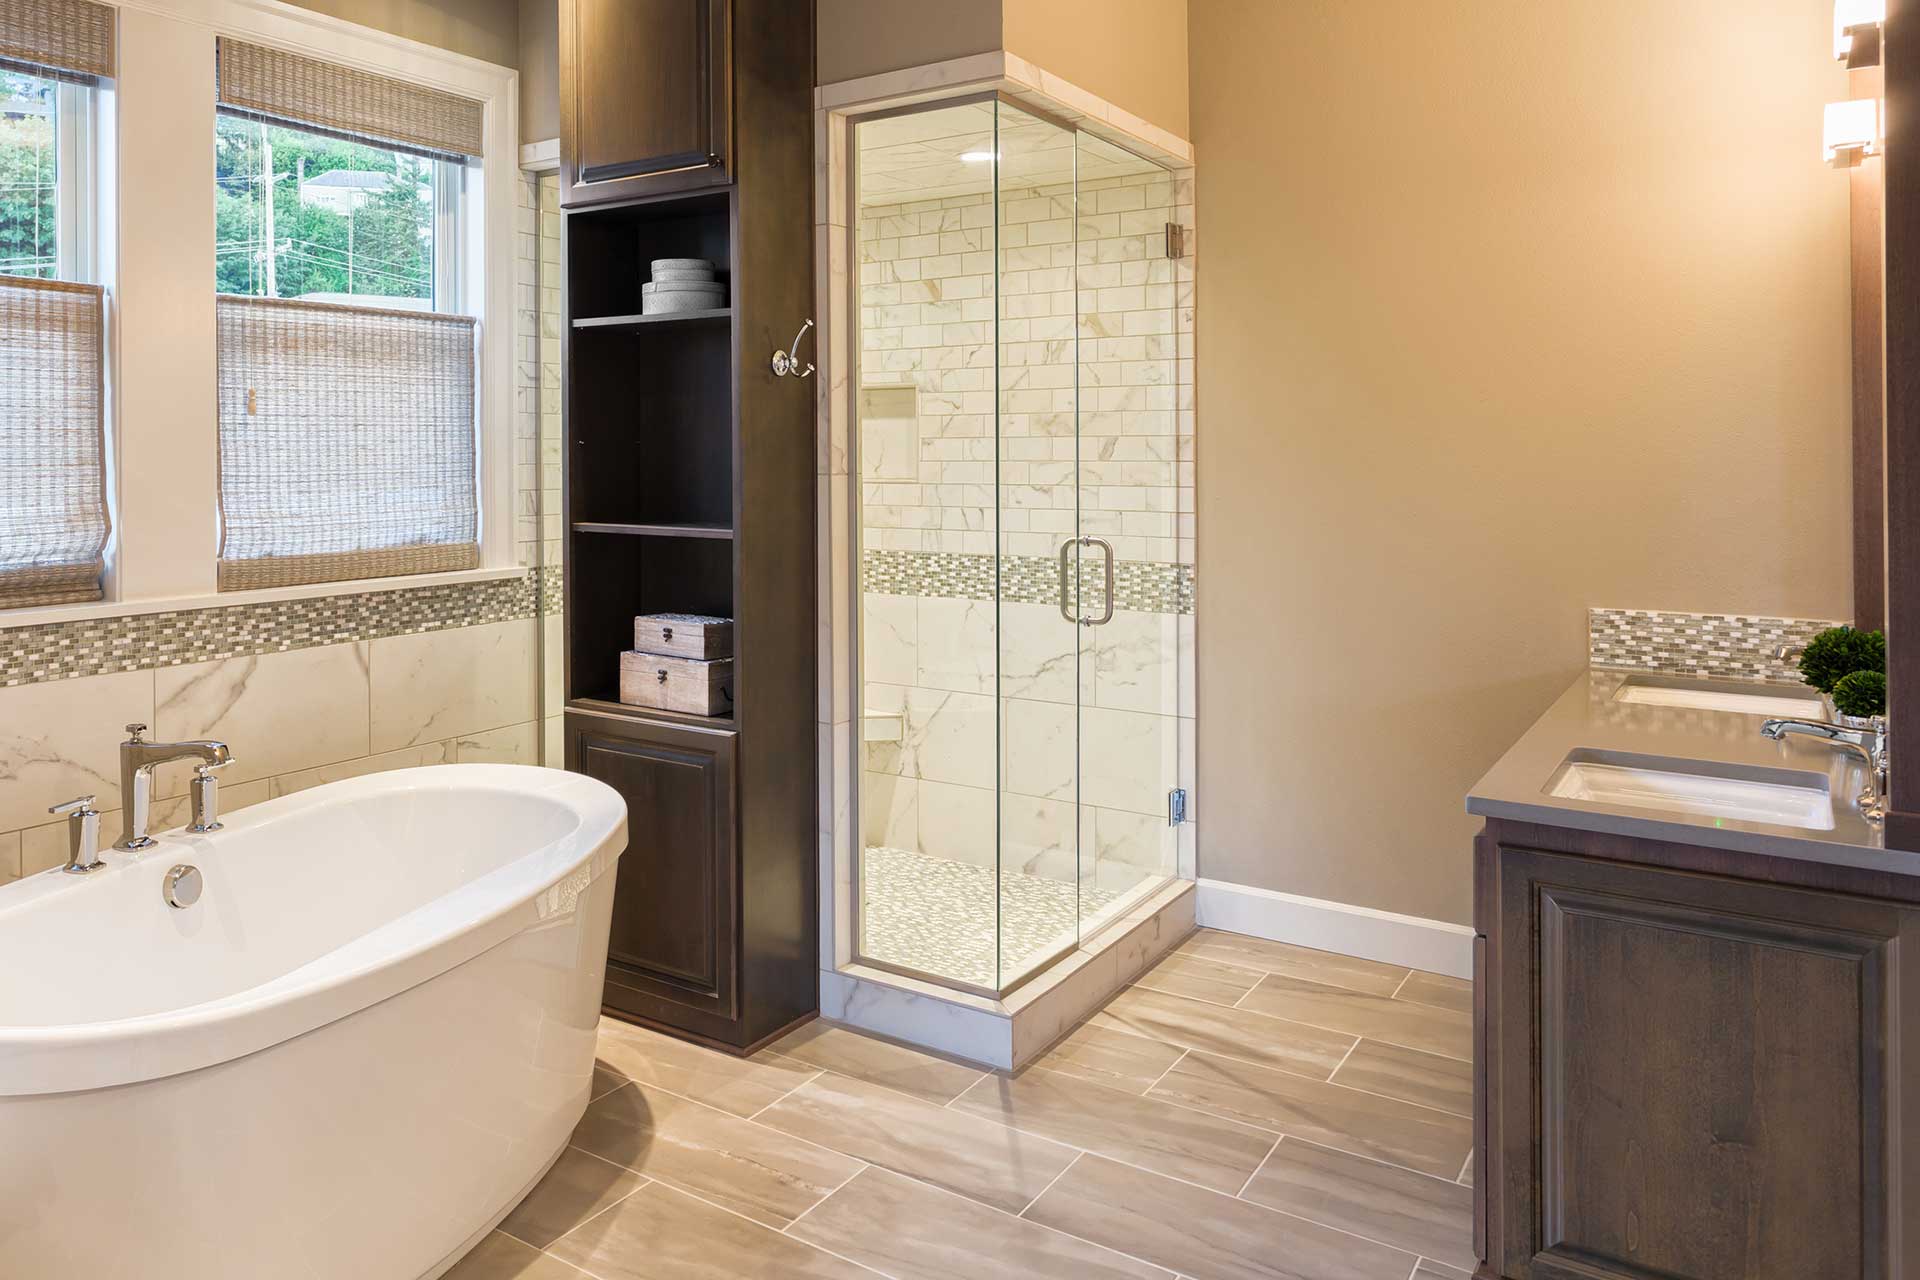 Bathroom remodel with white bathtub and hardwood floors from NTICE Designs Corp.